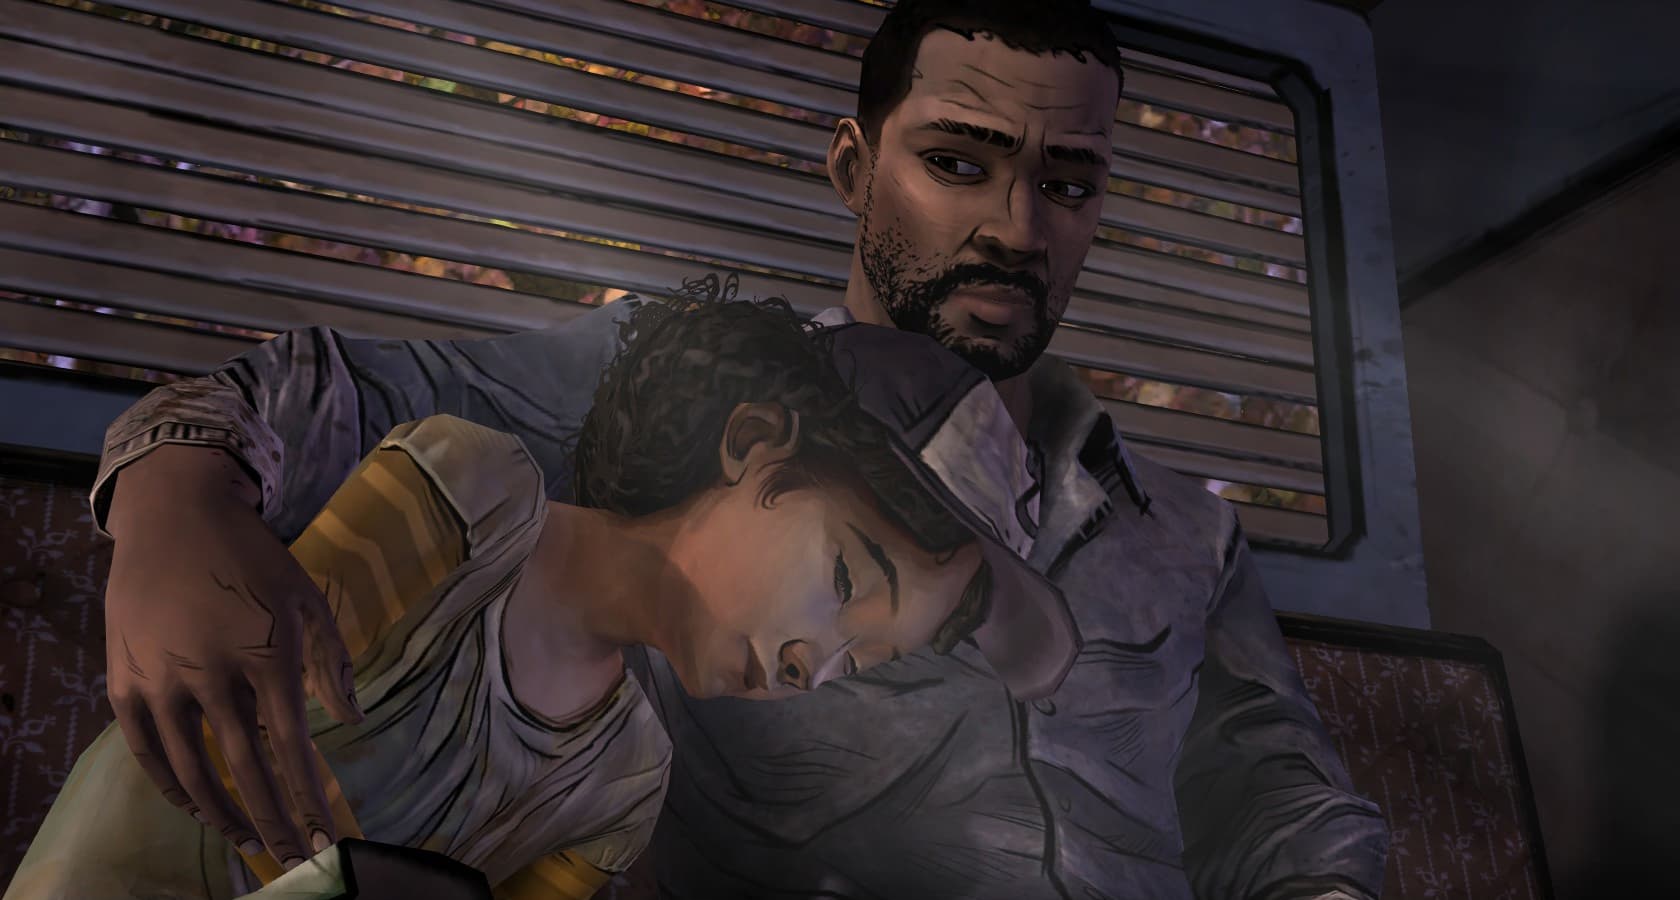 Lee and Clementine